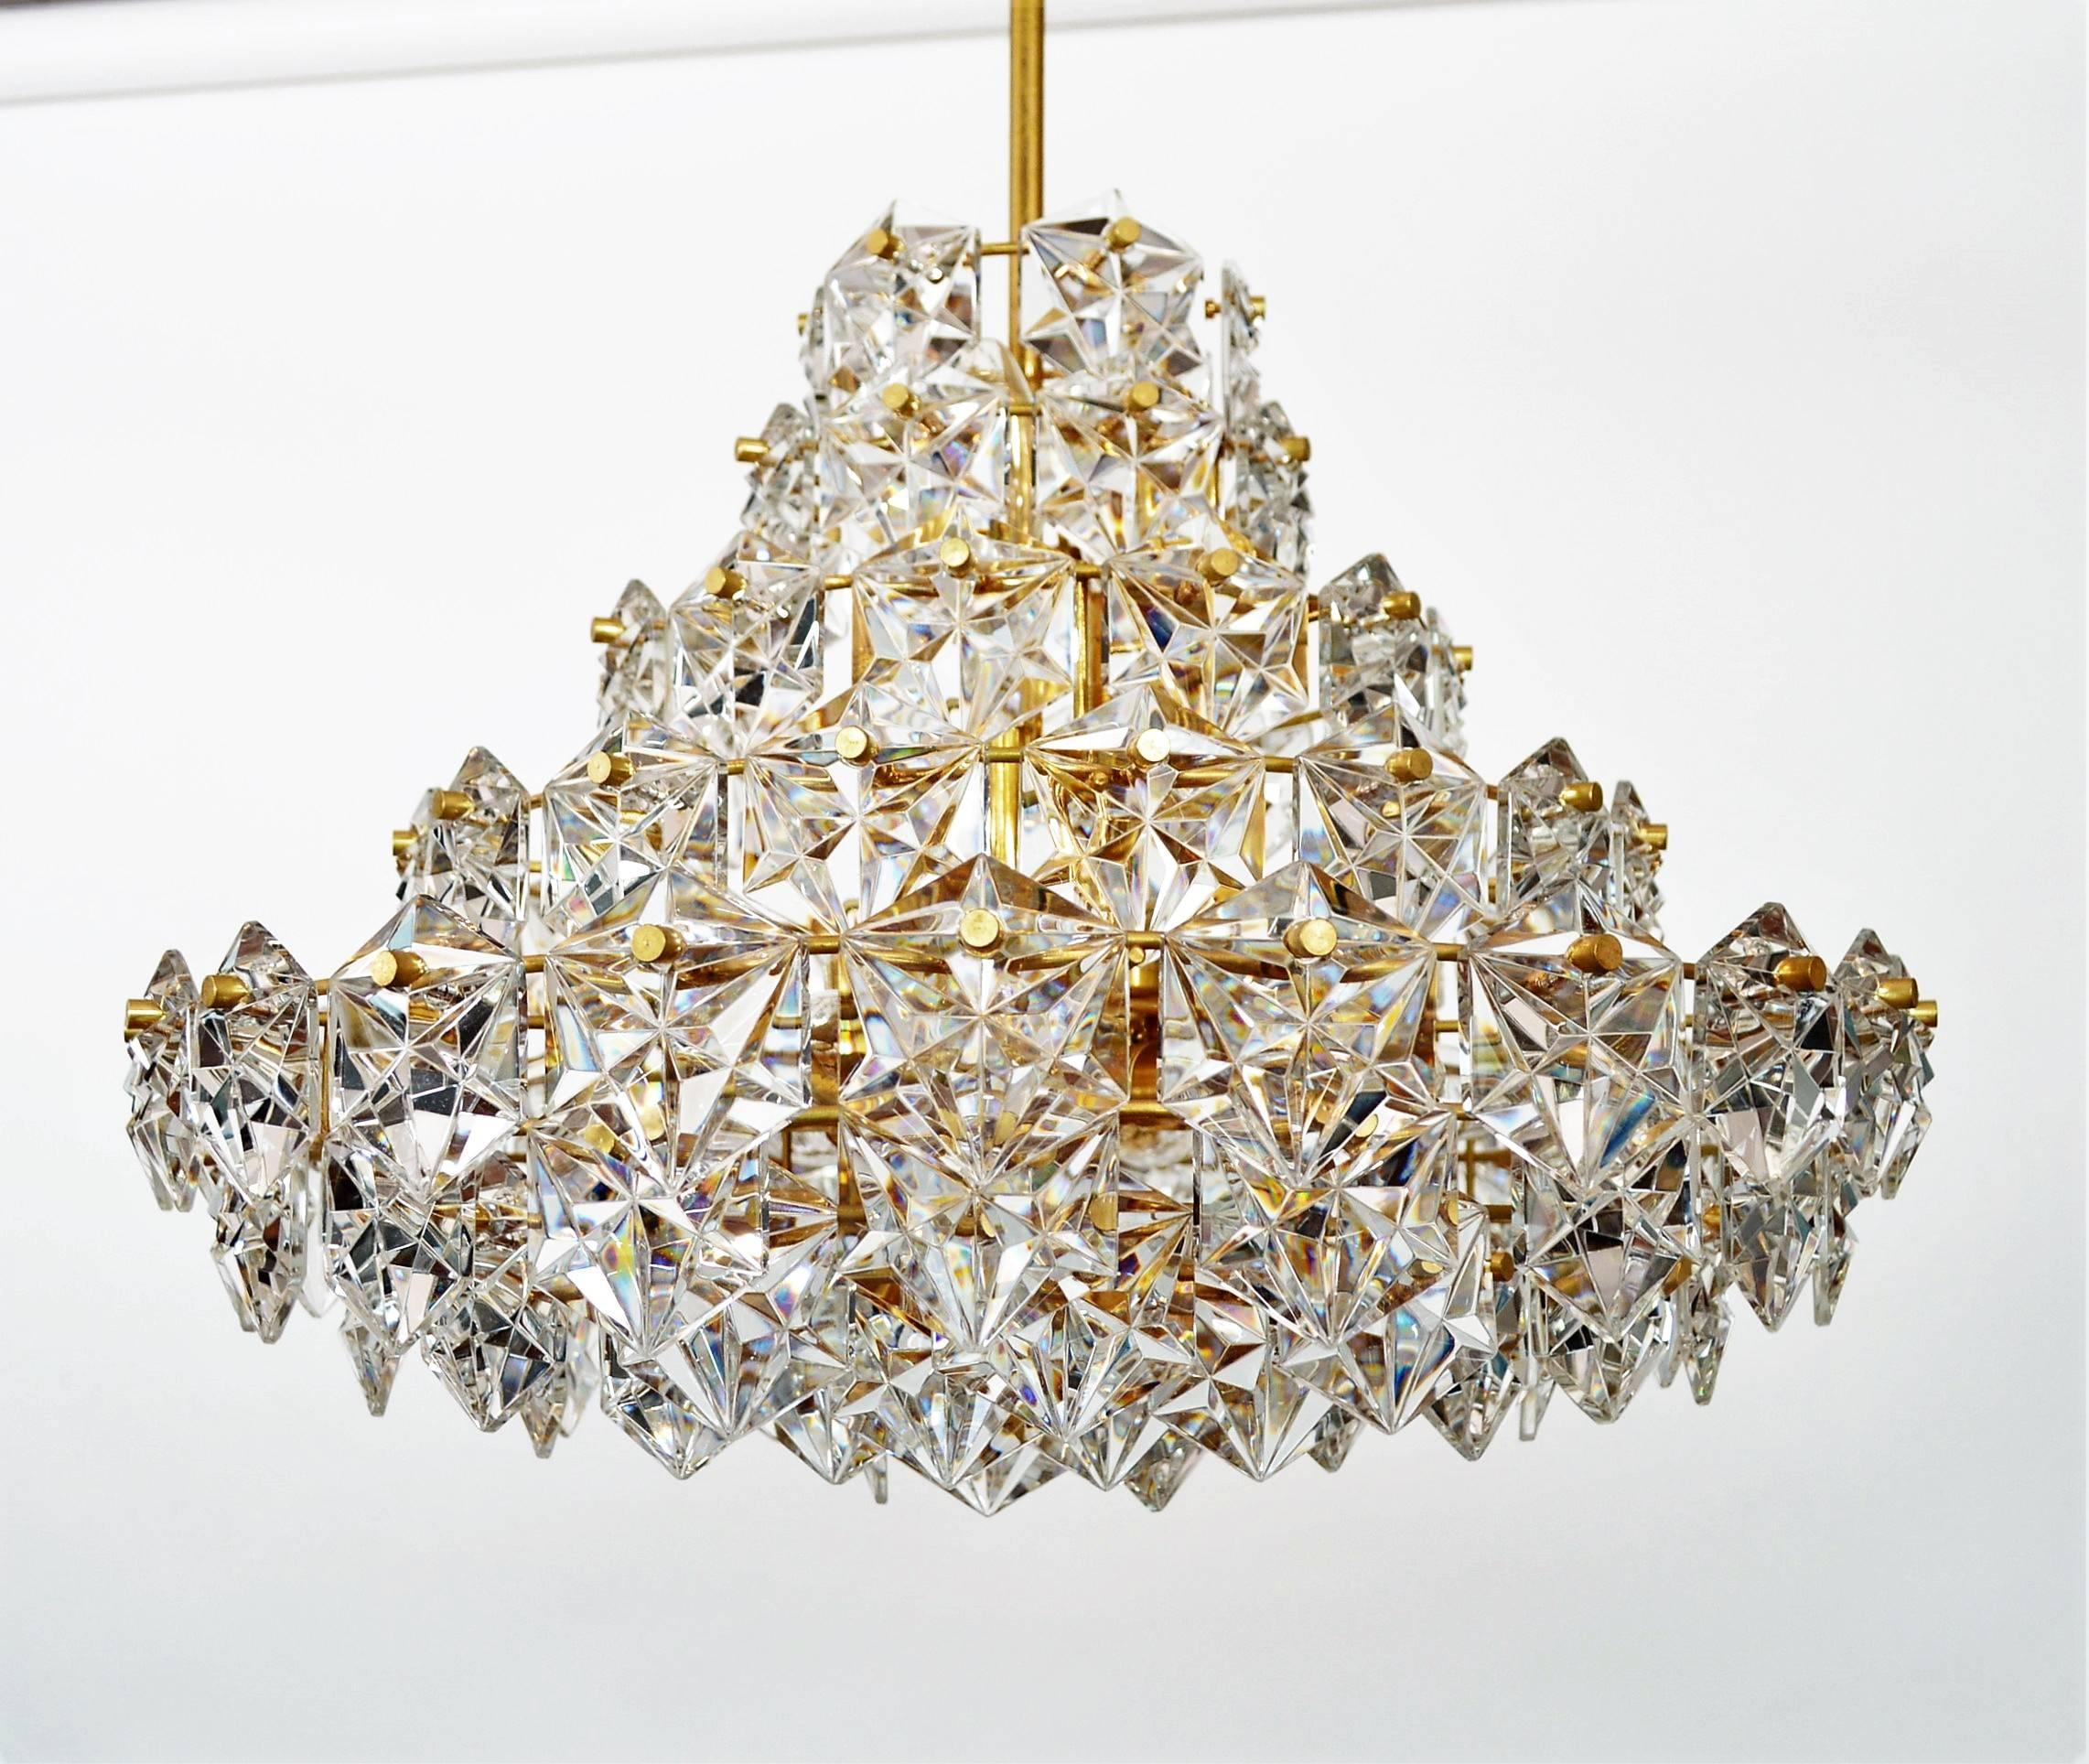 Amazing chandelier with nine-tiers full of shiny crystals and golden metal lamp frame.
Equipped with nine bulb holders for small candelabra E14 bulbs and one below for big Edison E27 standard bulb.
Made during the Hollywood Regency era 1970s in